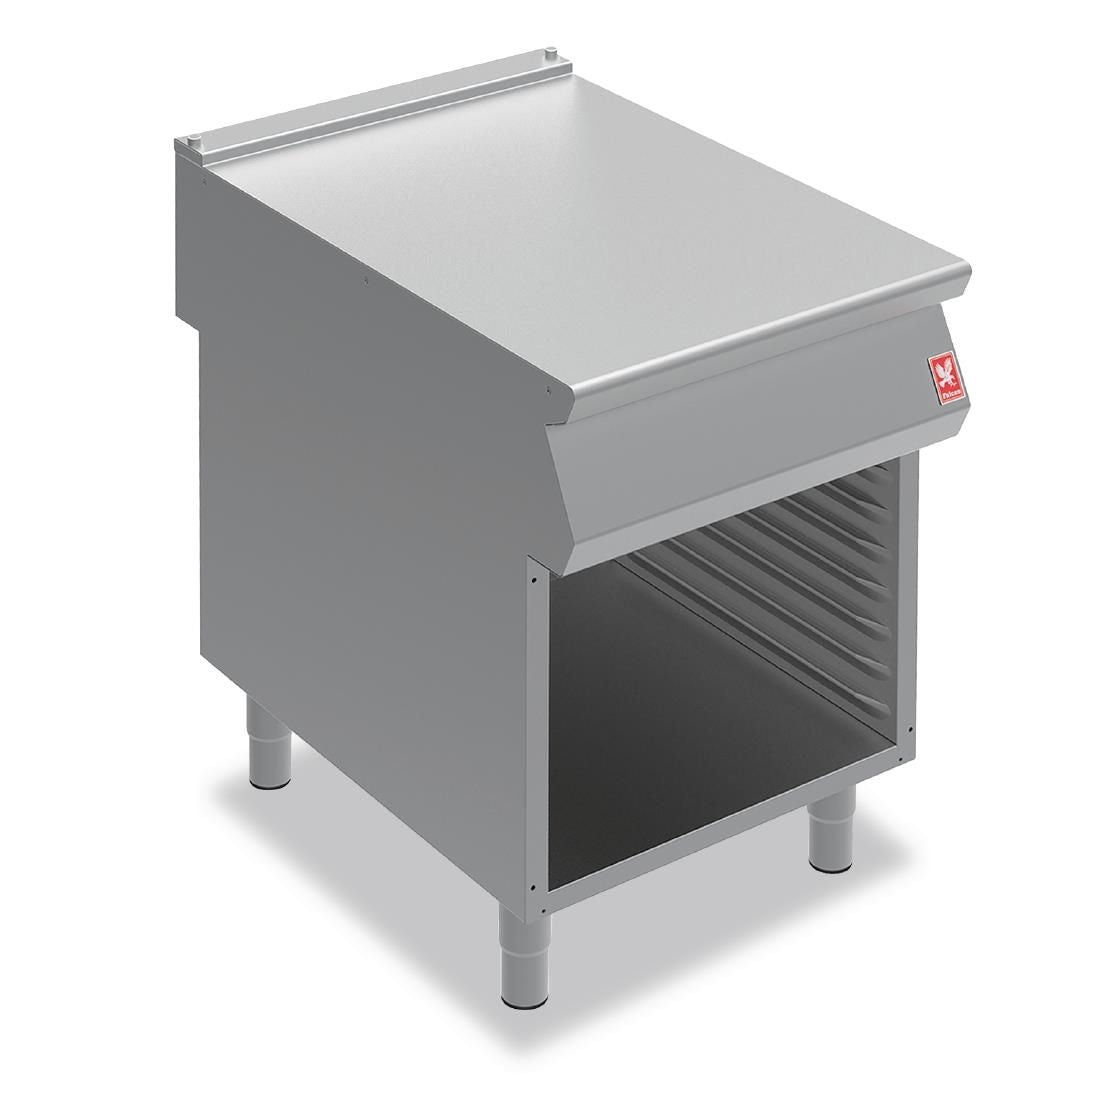 Falcon F900 Open Cabinet With Pressed Runners on Legs JD Catering Equipment Solutions Ltd